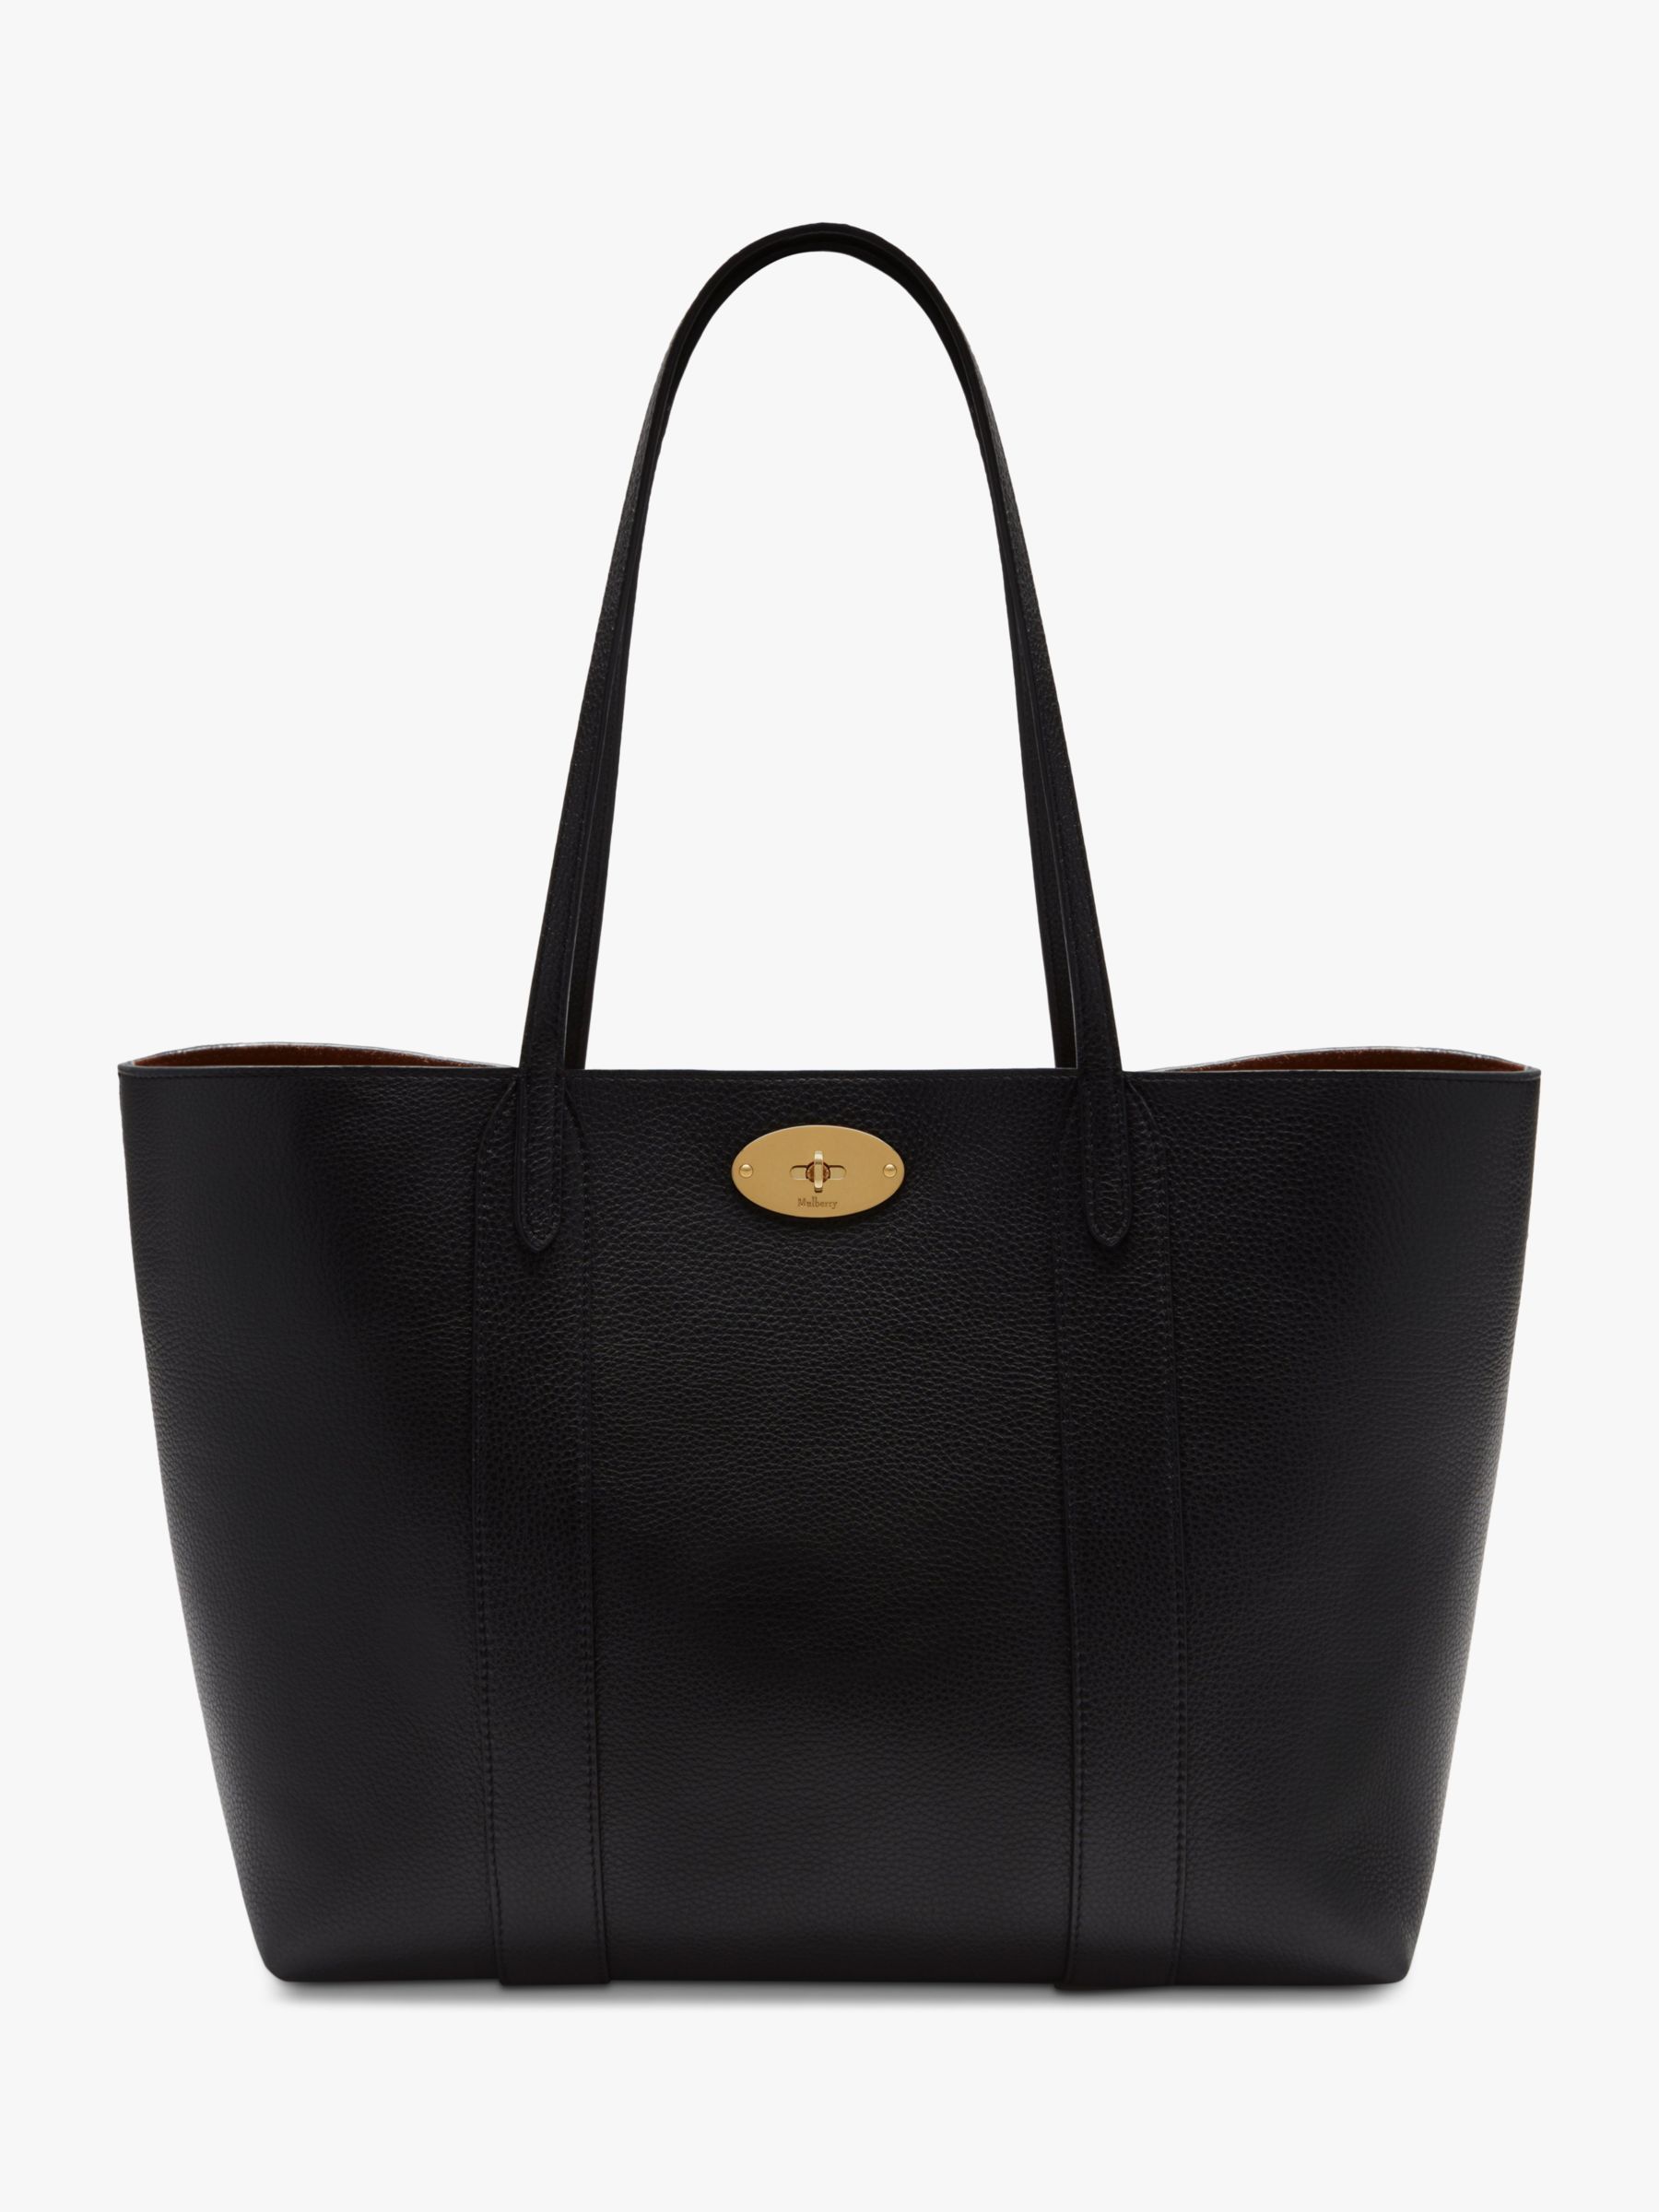 Mulberry Bayswater Small Classic Grain Leather Tote Bag, Black at John ...